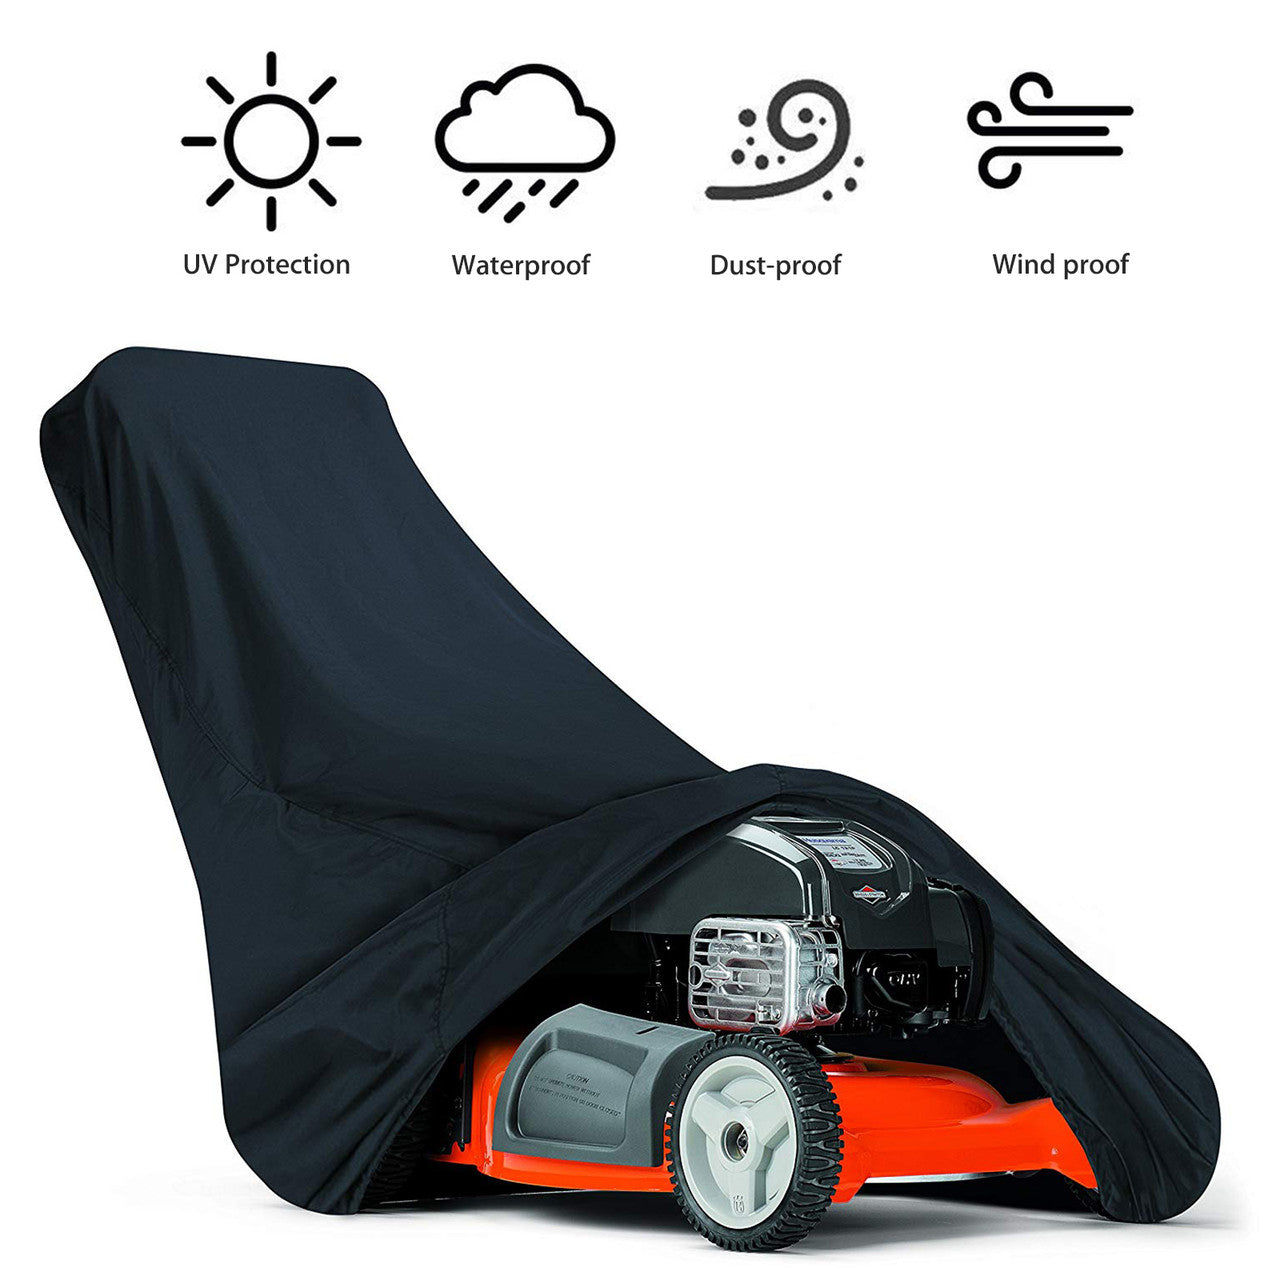 Lawn Mower Tractor Cover, UV Protection and Water Resistant Cover Universal Fit, Black